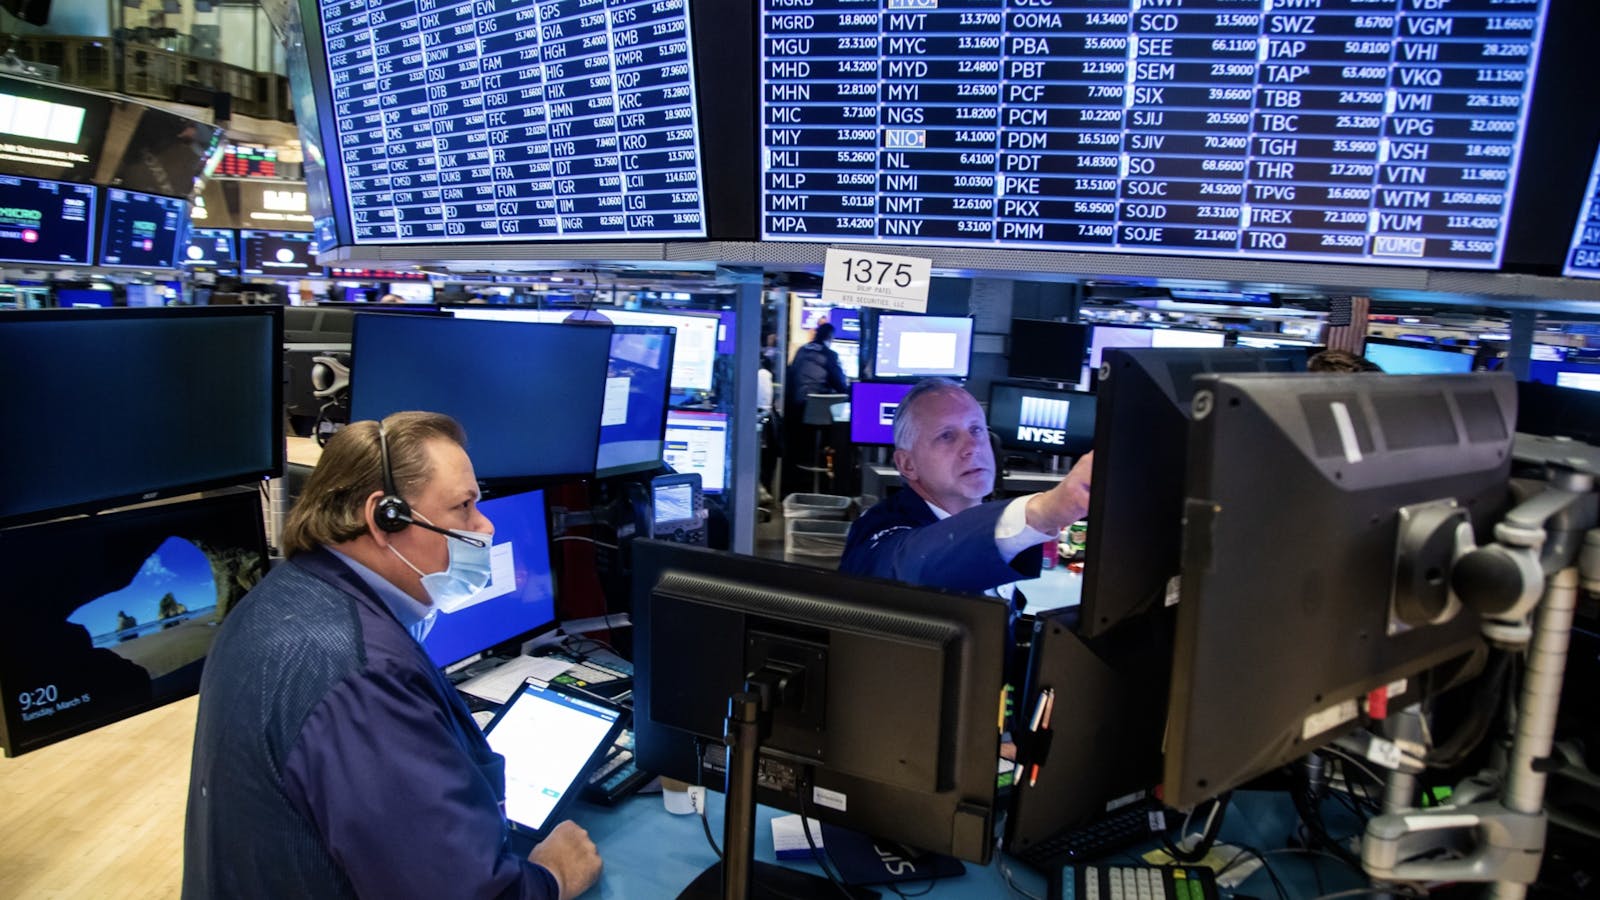 Traders on the floor of the New York Stock Exchange. Photo by Bloomberg.